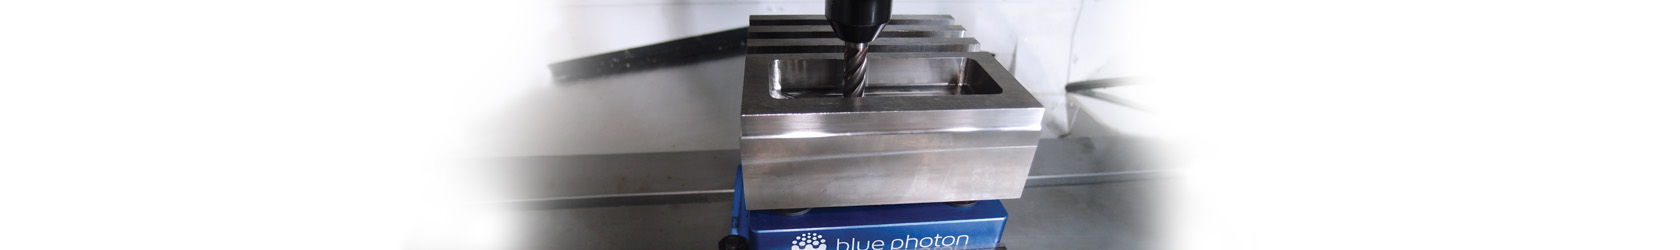 Photo of a drill press drilling a hole into a metal part, held in place by Blue Photon light-activated adhesive